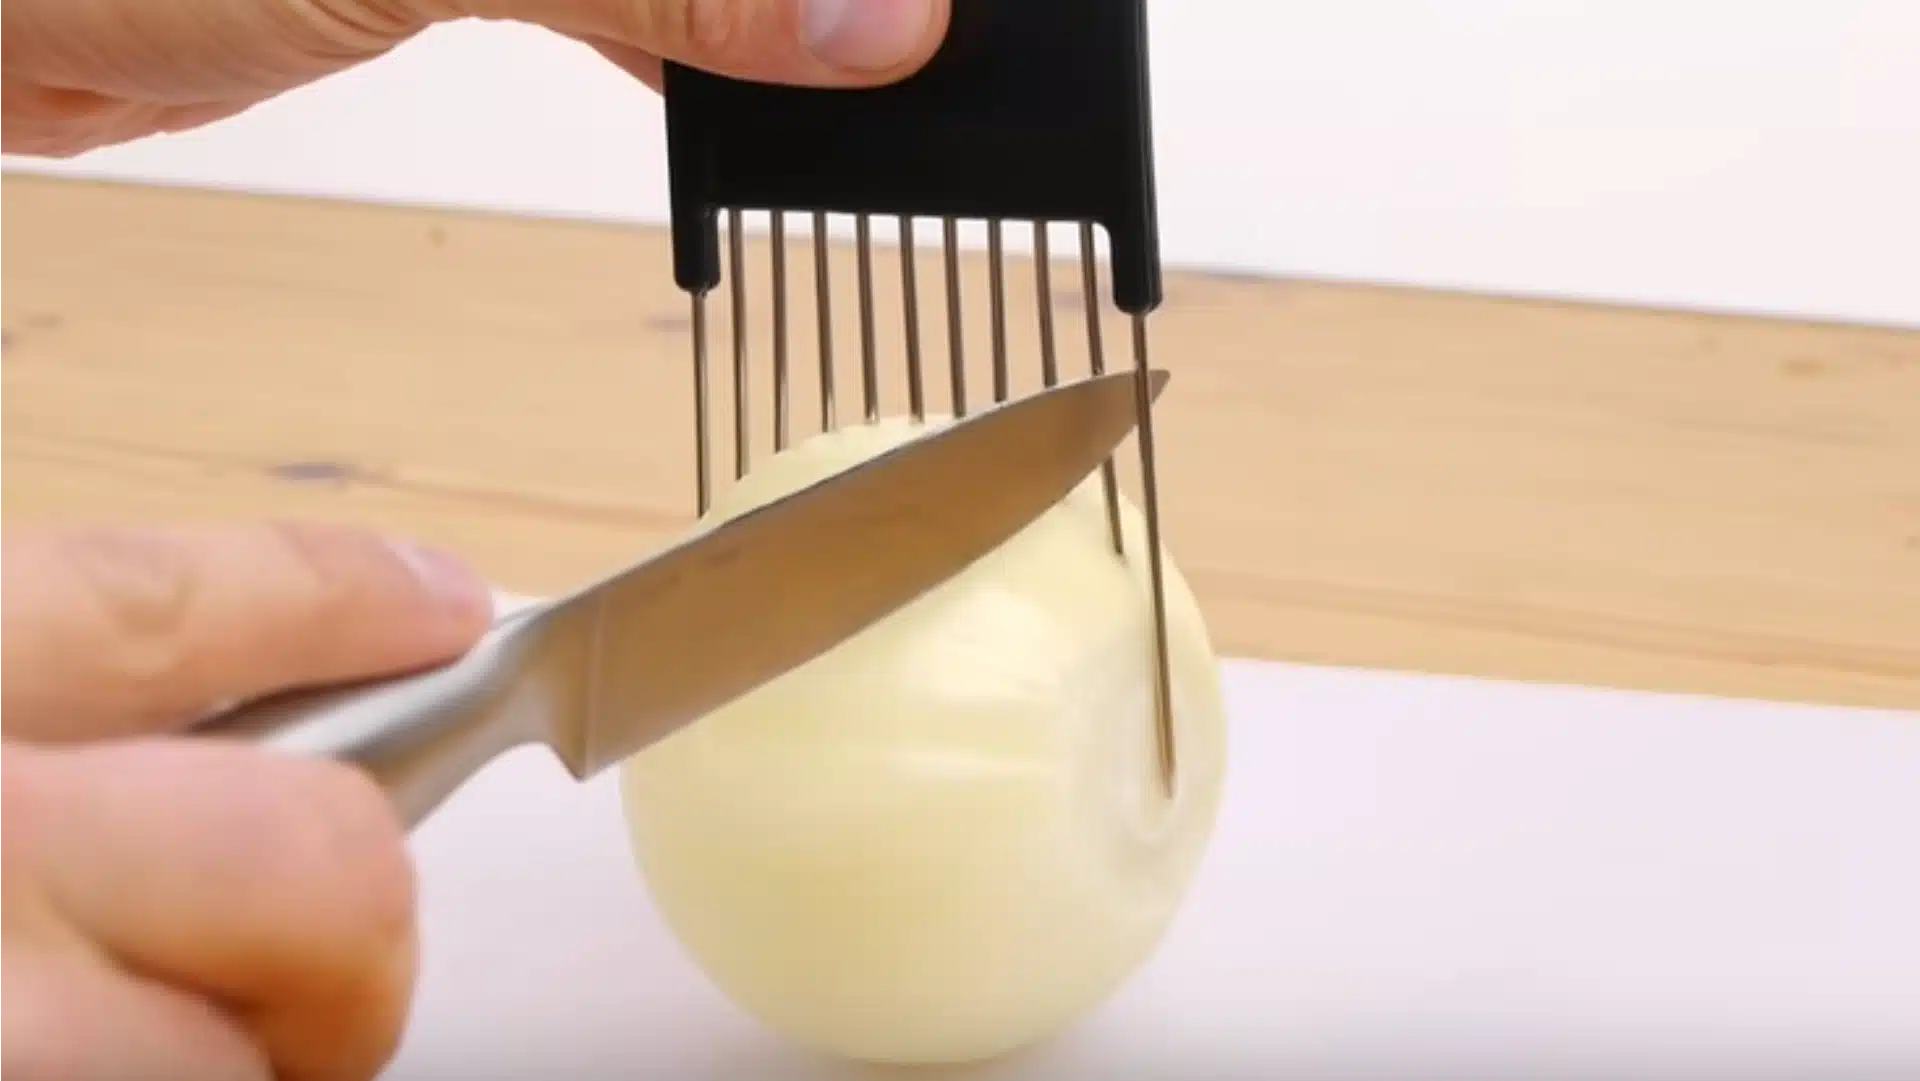 How To Cut Onions In The Simplest Way